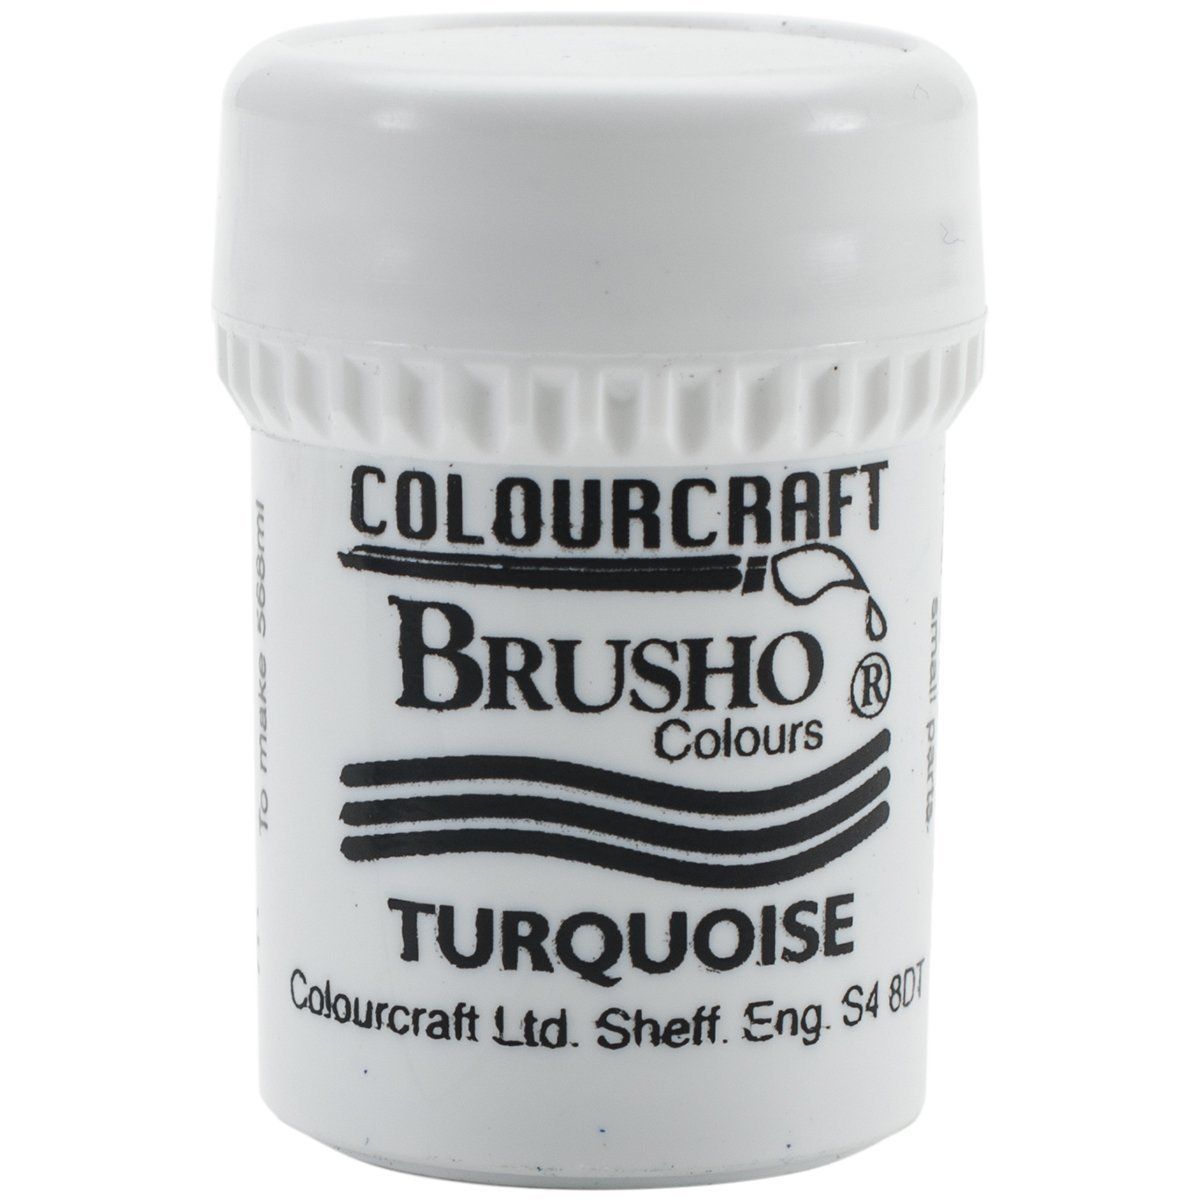 Brusho Crystal Colour - Turquoise 15 gm